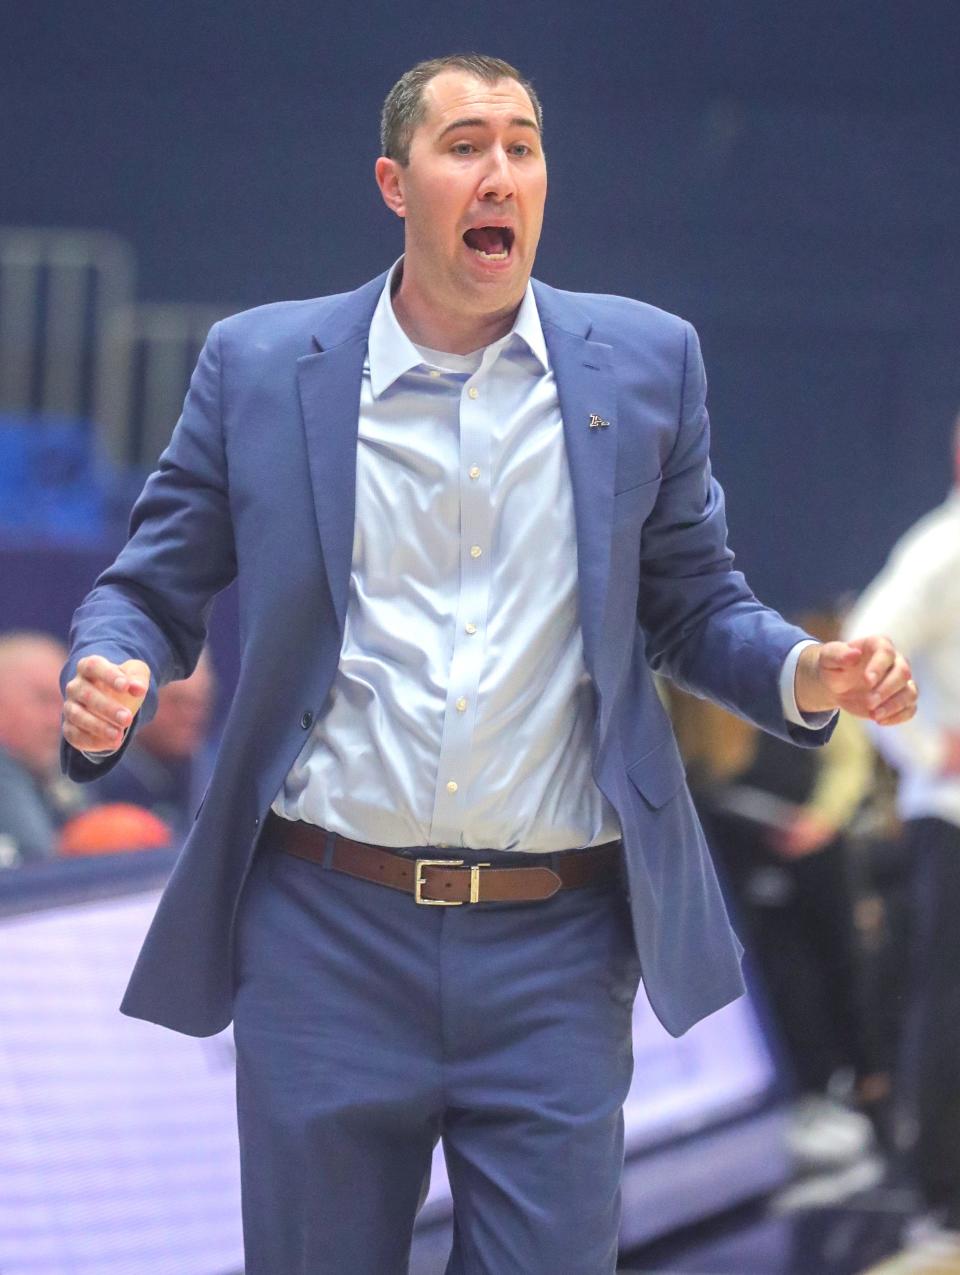 University of Akron coach Ryan Gensler reacts after a hard second-quarter foul on Alexus Mobley in a game against Oakland on Monday in Akron.